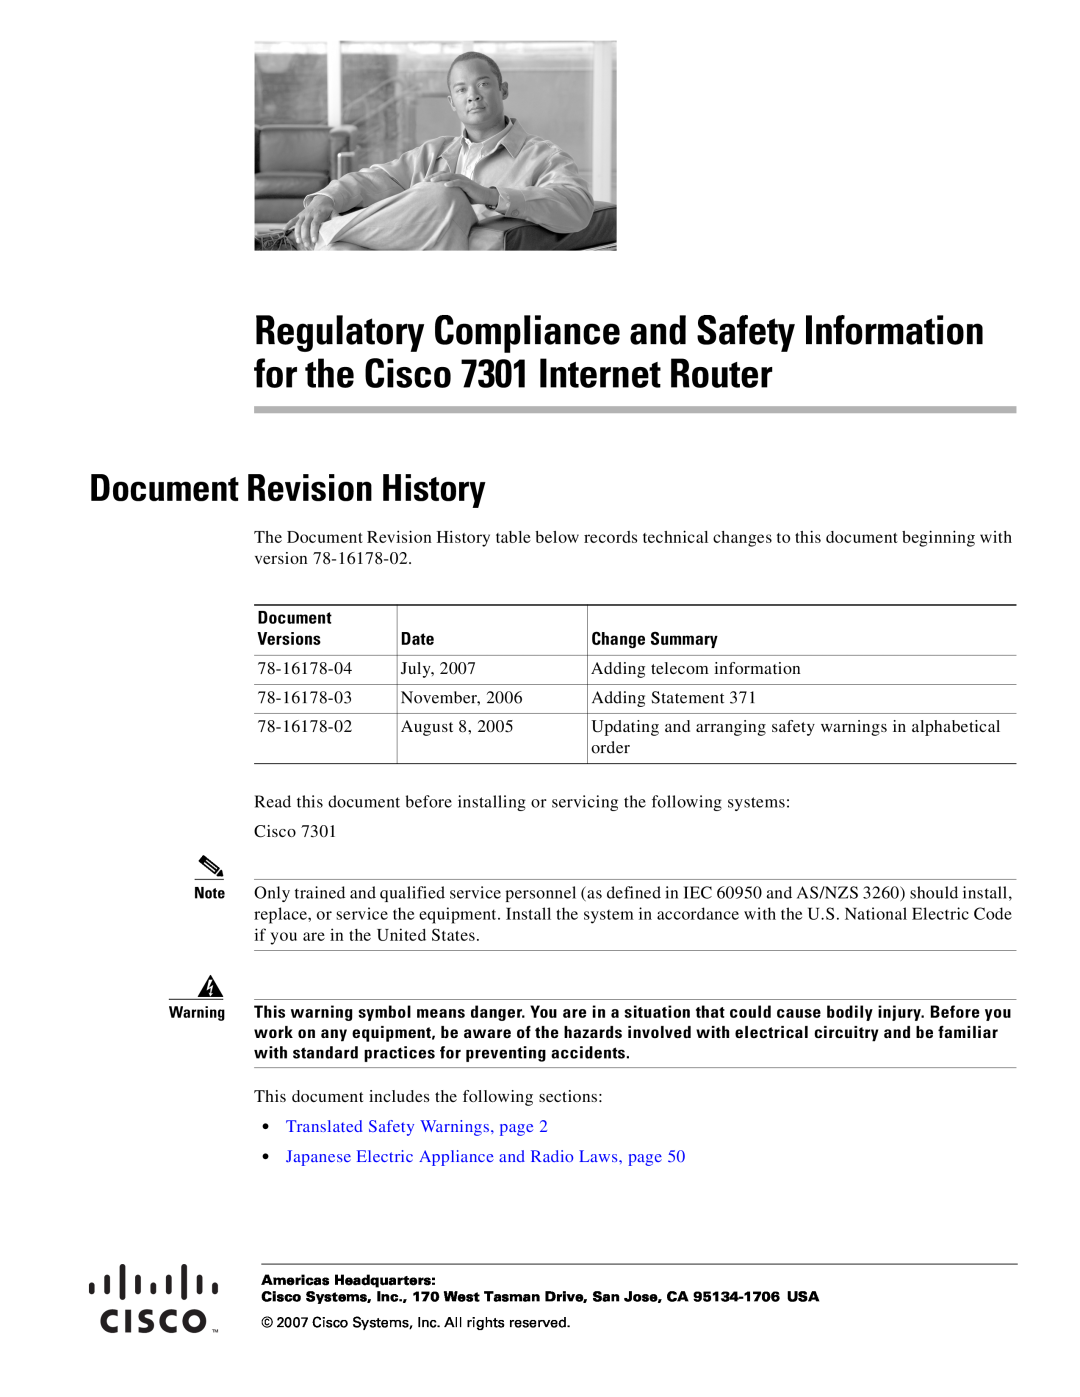 Cisco Systems CISCO7301 manual Document Revision History, Versions, Date, Change Summary 